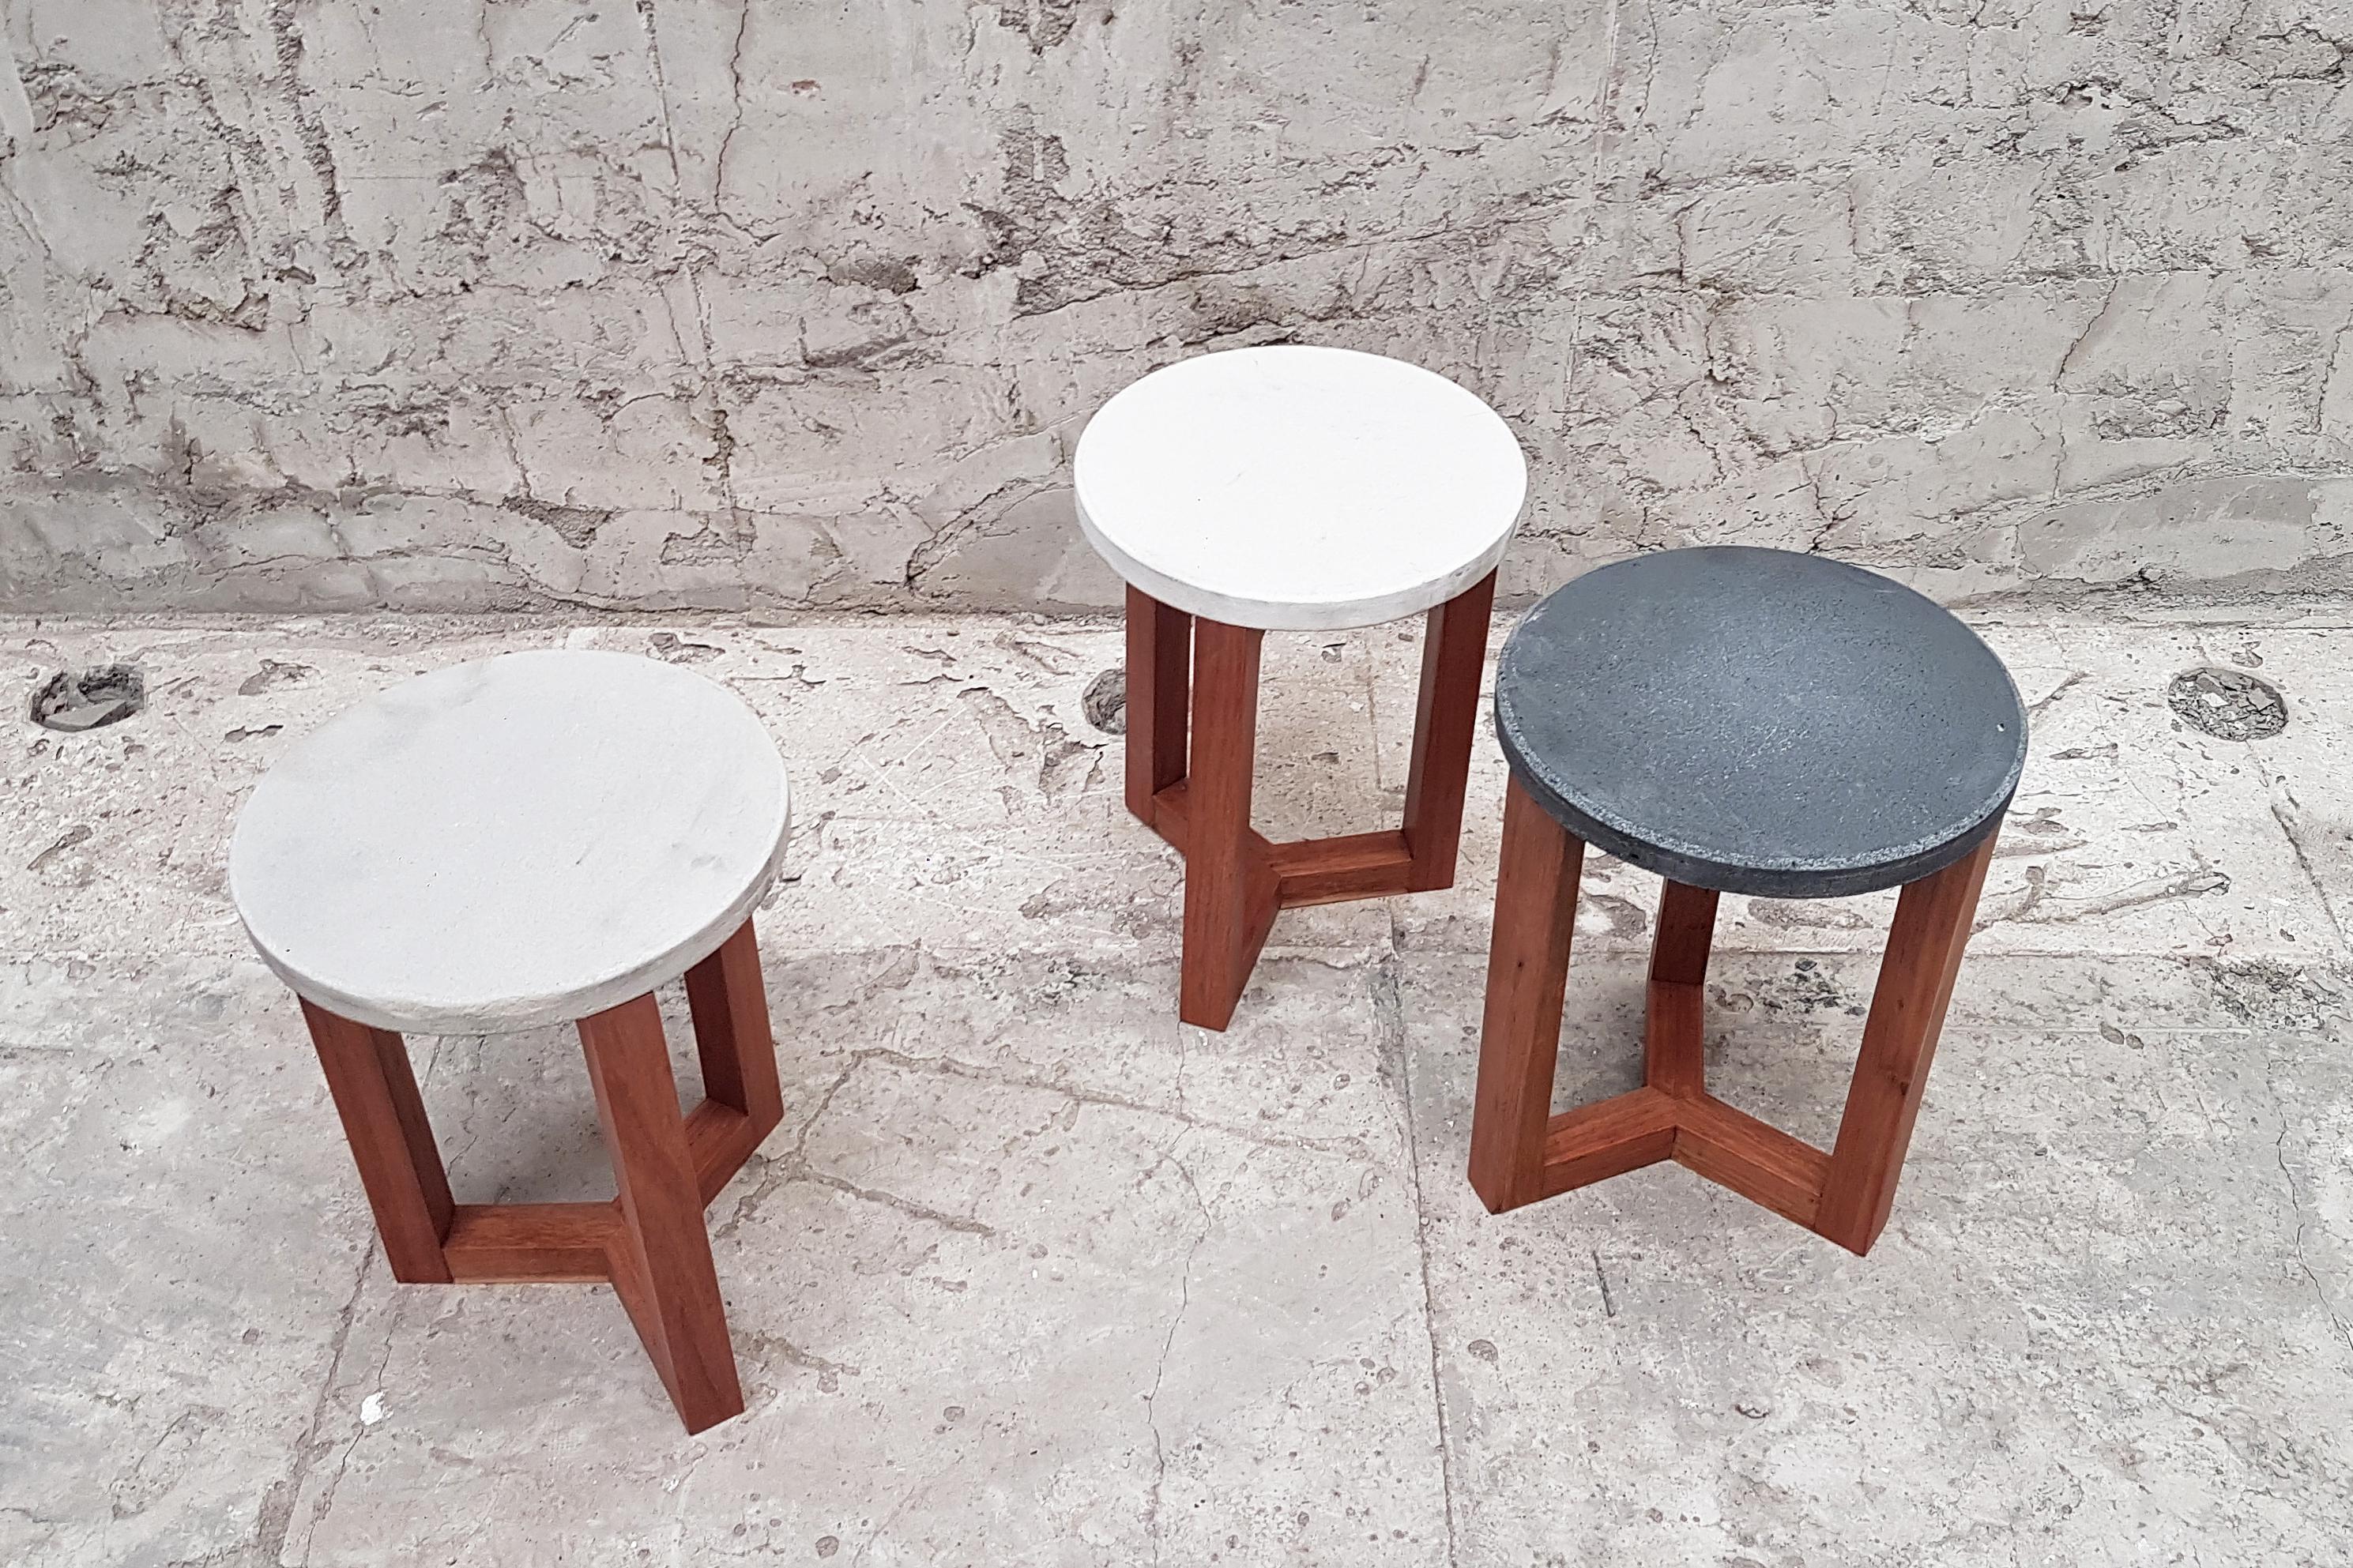 Mexican Contemporary Design Wood and Concrete Stool (Moderne) im Angebot